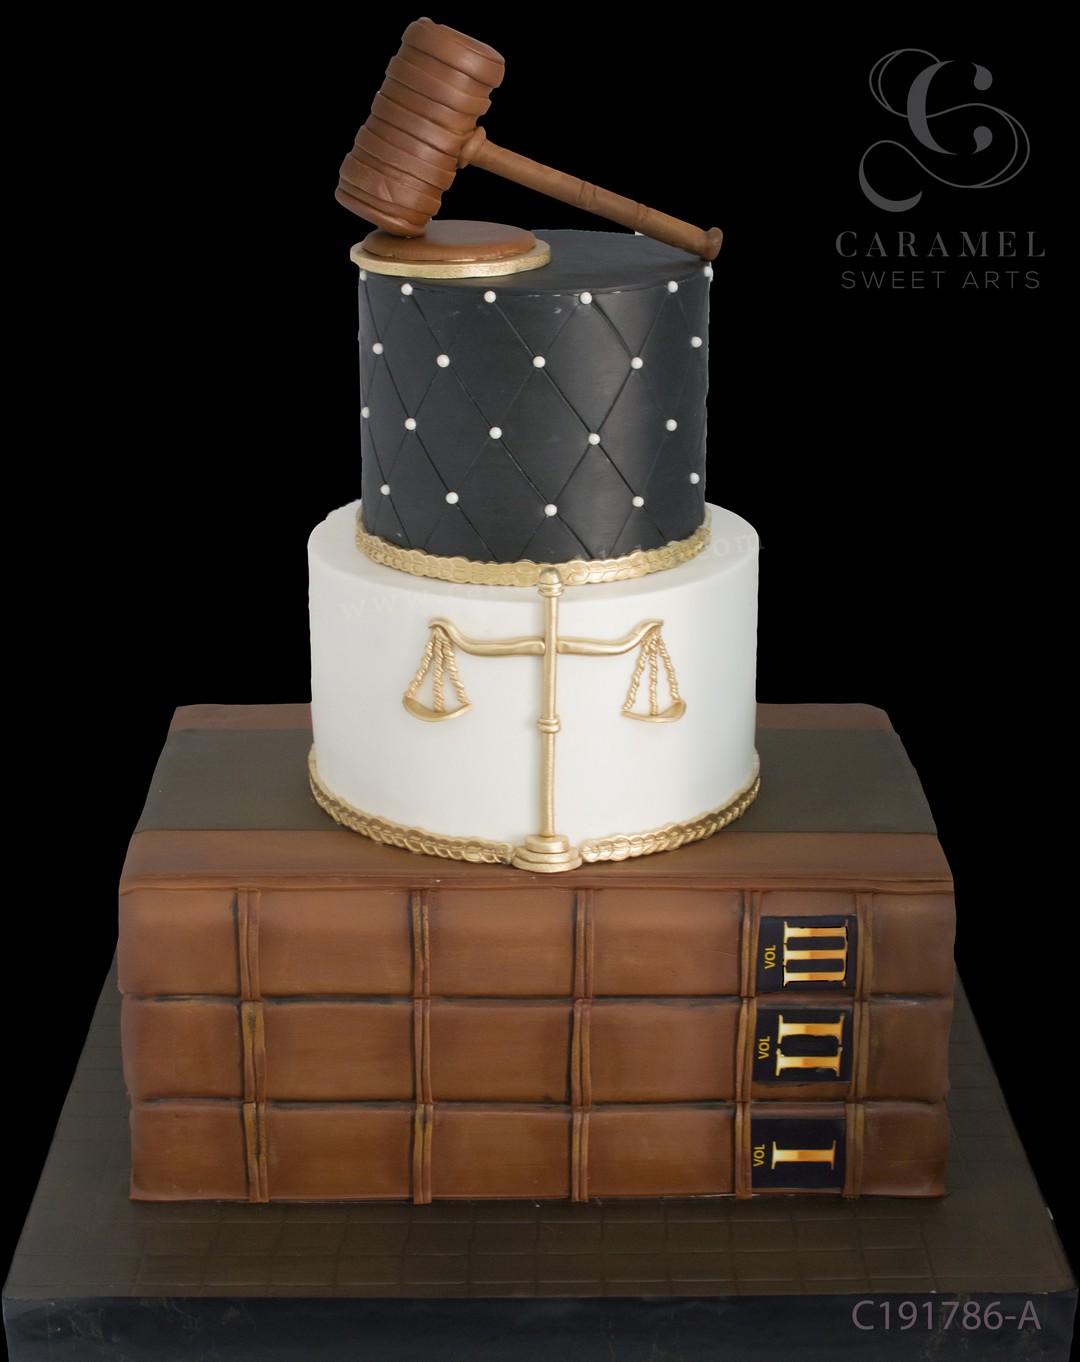 Class of 2021 Congratulations Lawyer Cake Topper - High School/College  Graduate Congratulations Cake Decorations-Case Closed Graduation Party  Decorations Supplies : Amazon.ae: Grocery